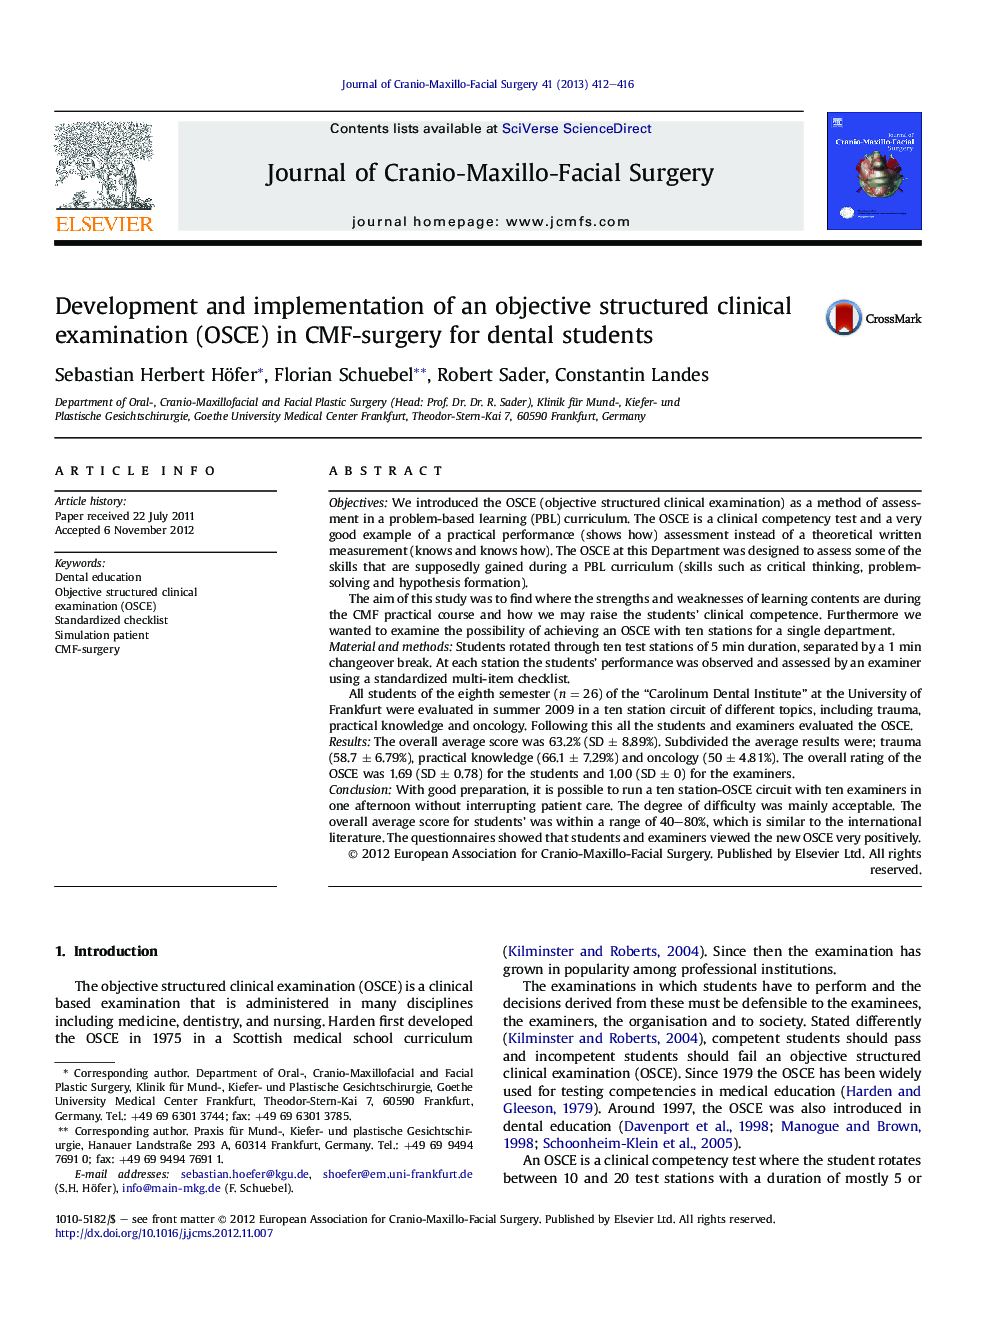 Development and implementation of an objective structured clinical examination (OSCE) in CMF-surgery for dental students